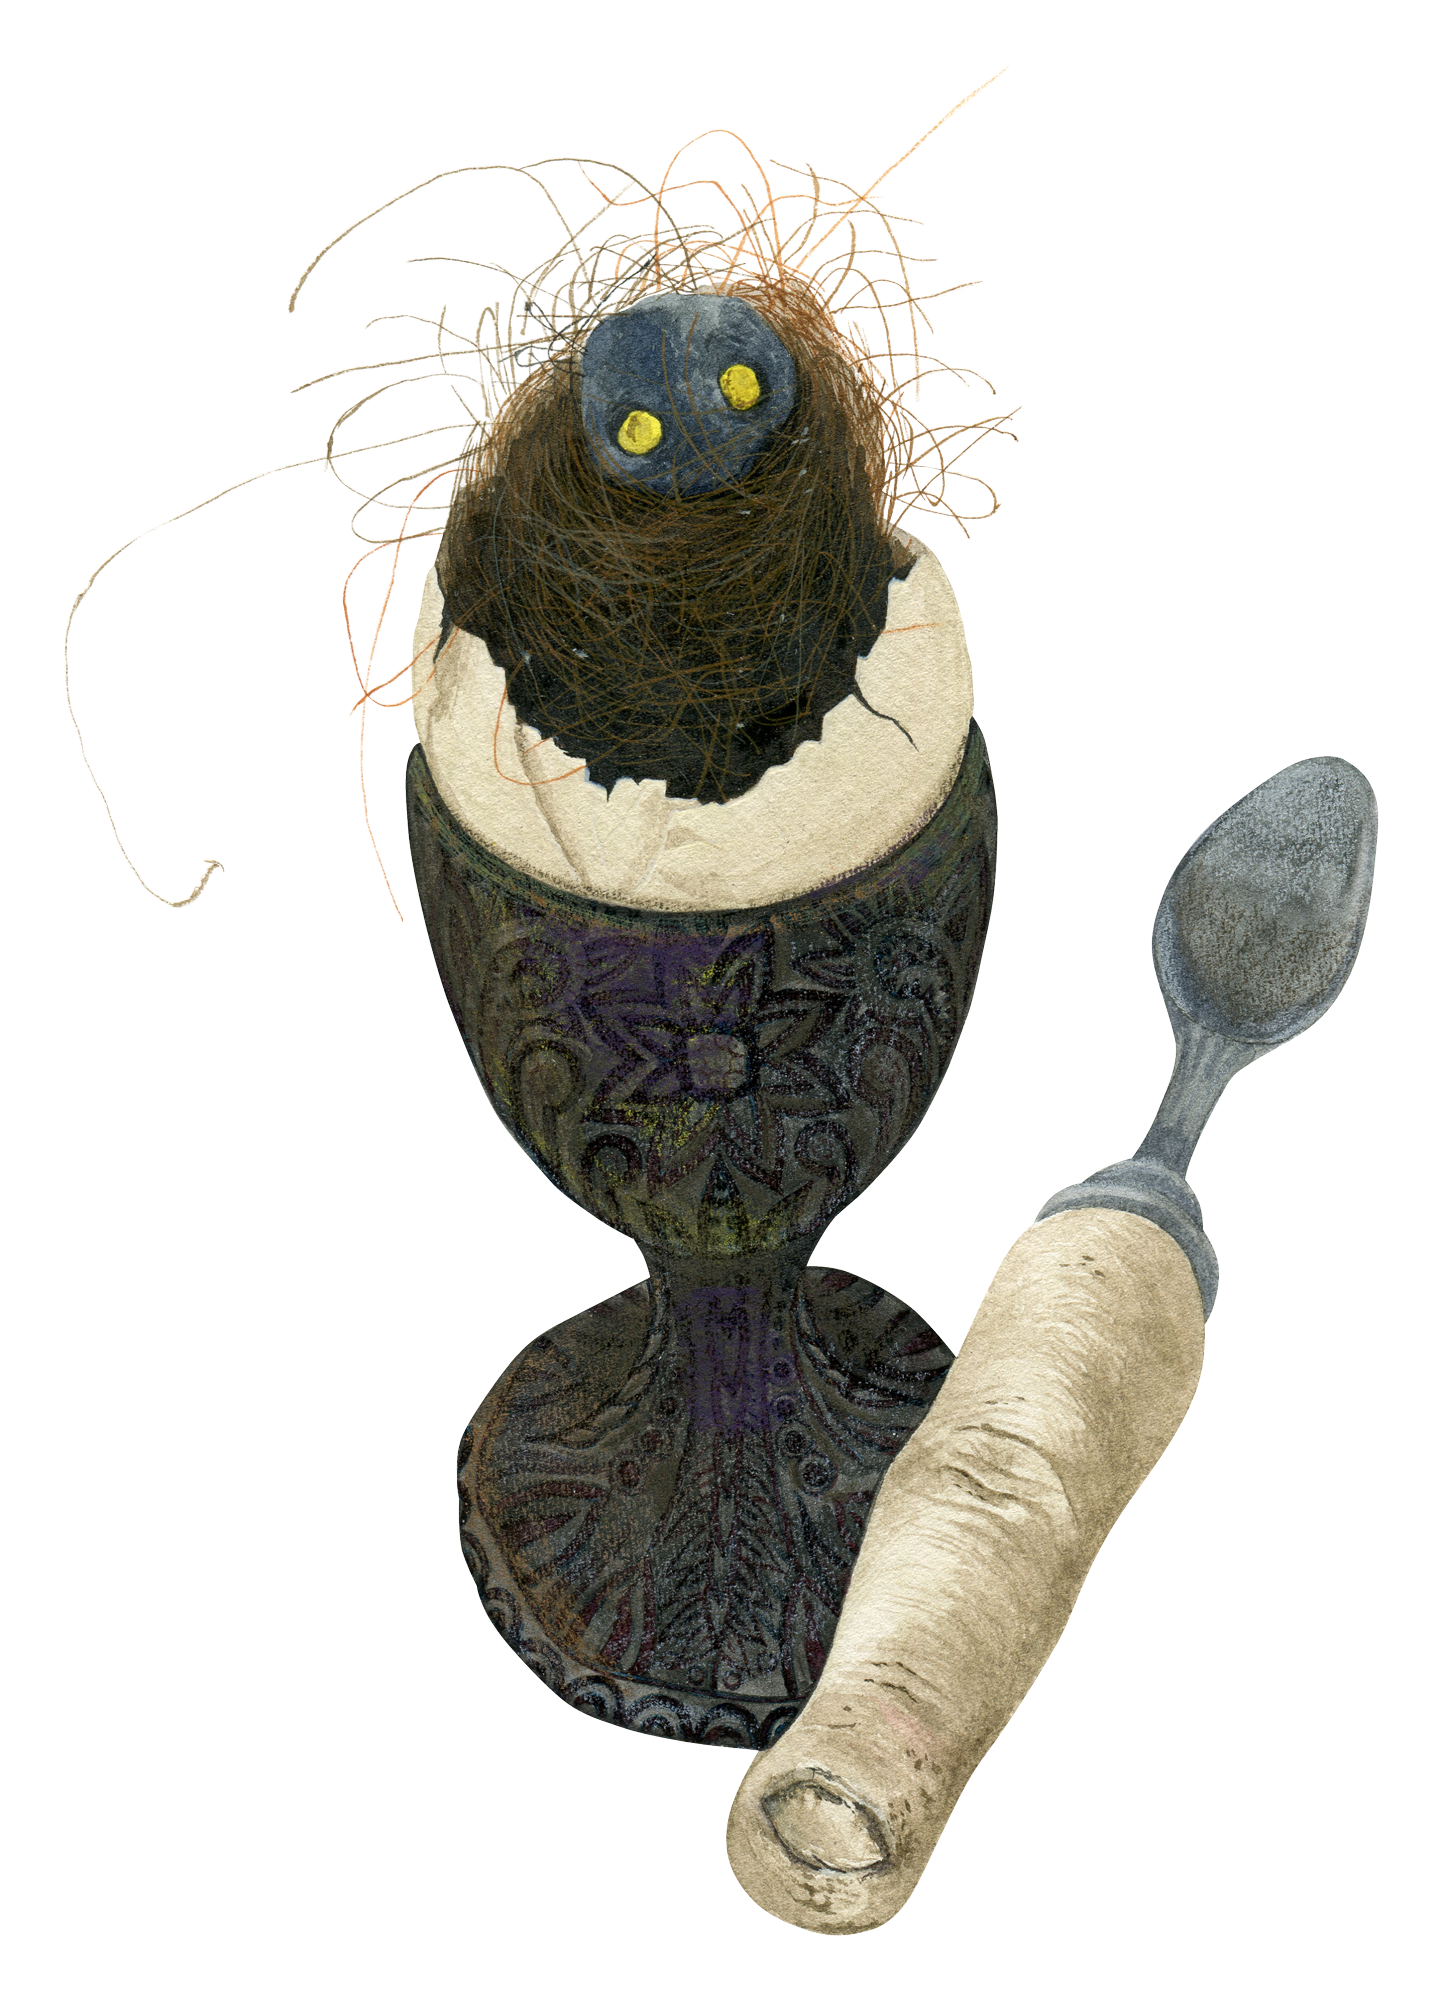 A peeled egg in a glass - inside something hairy with eyes, the spoon next to it is a finger